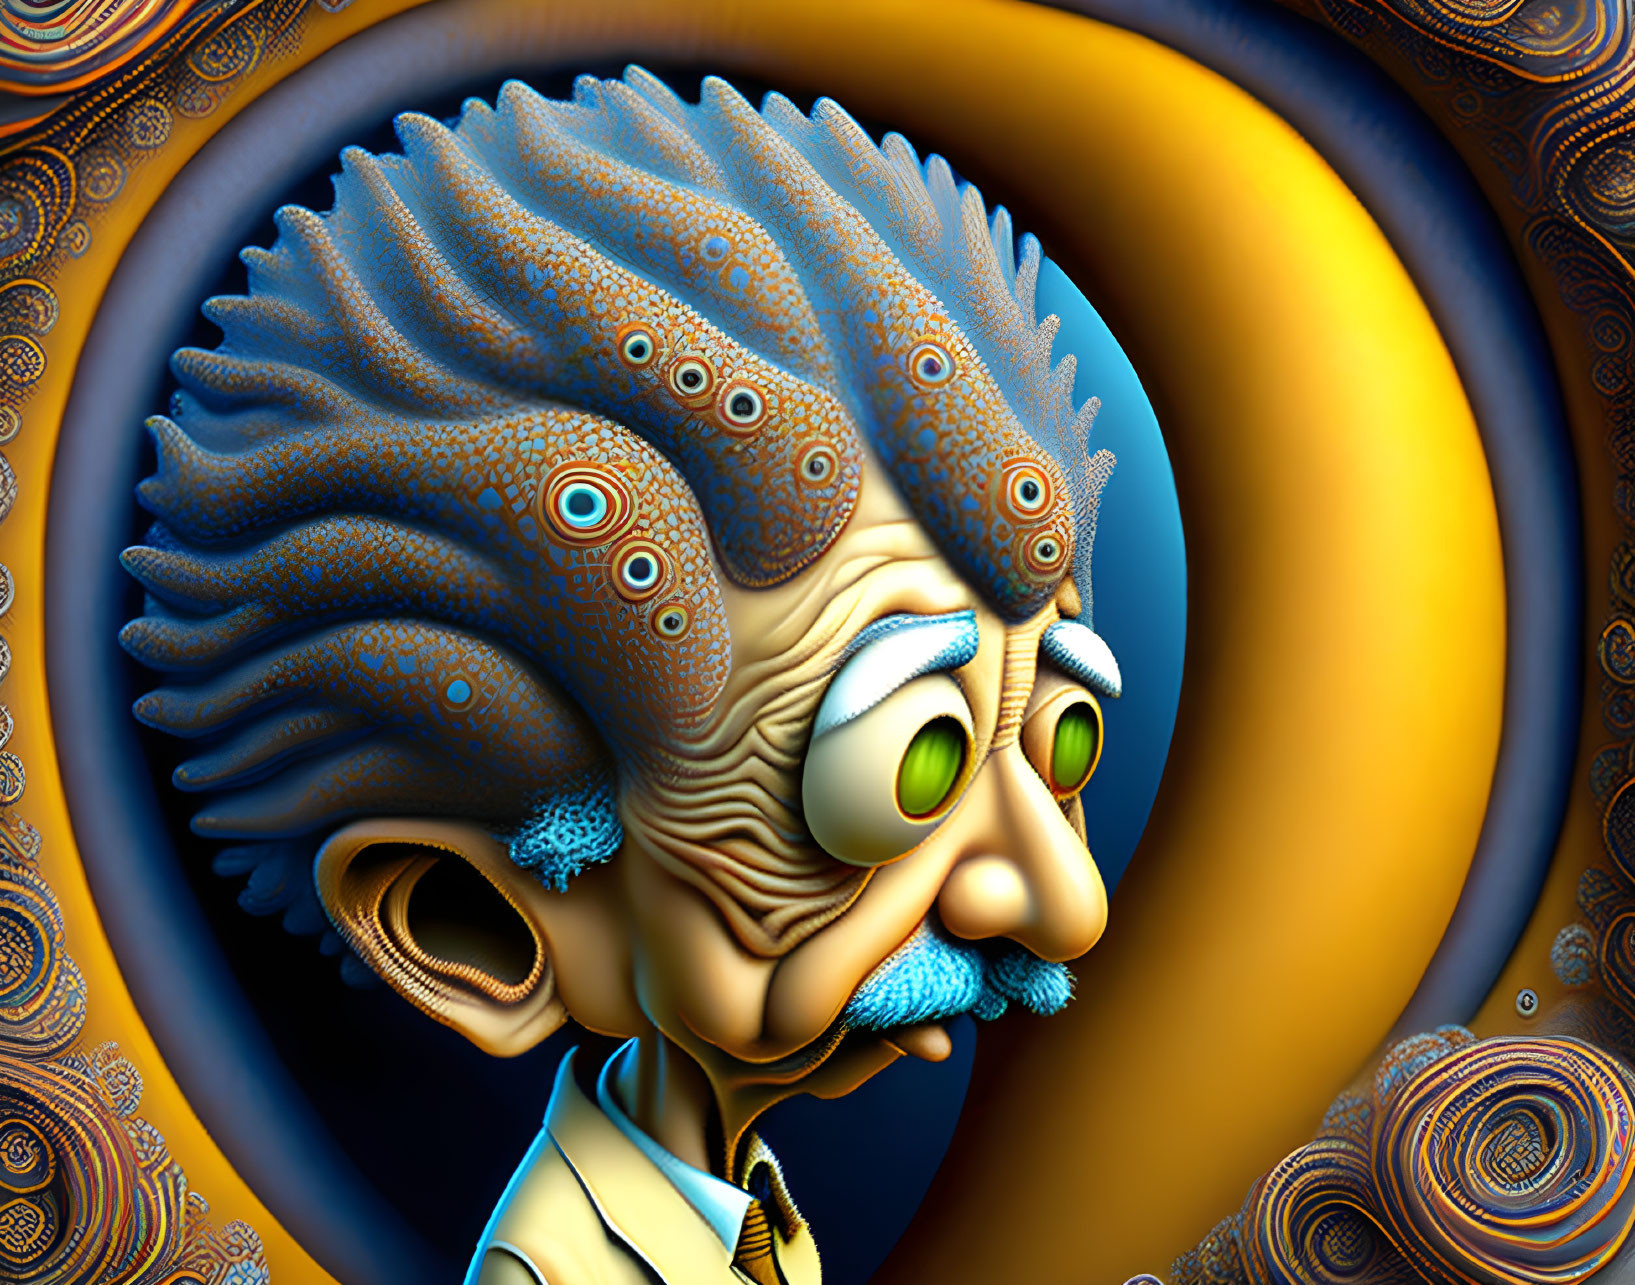 Vibrant digital artwork of stylized elderly character with intricate patterns on skin against abstract background